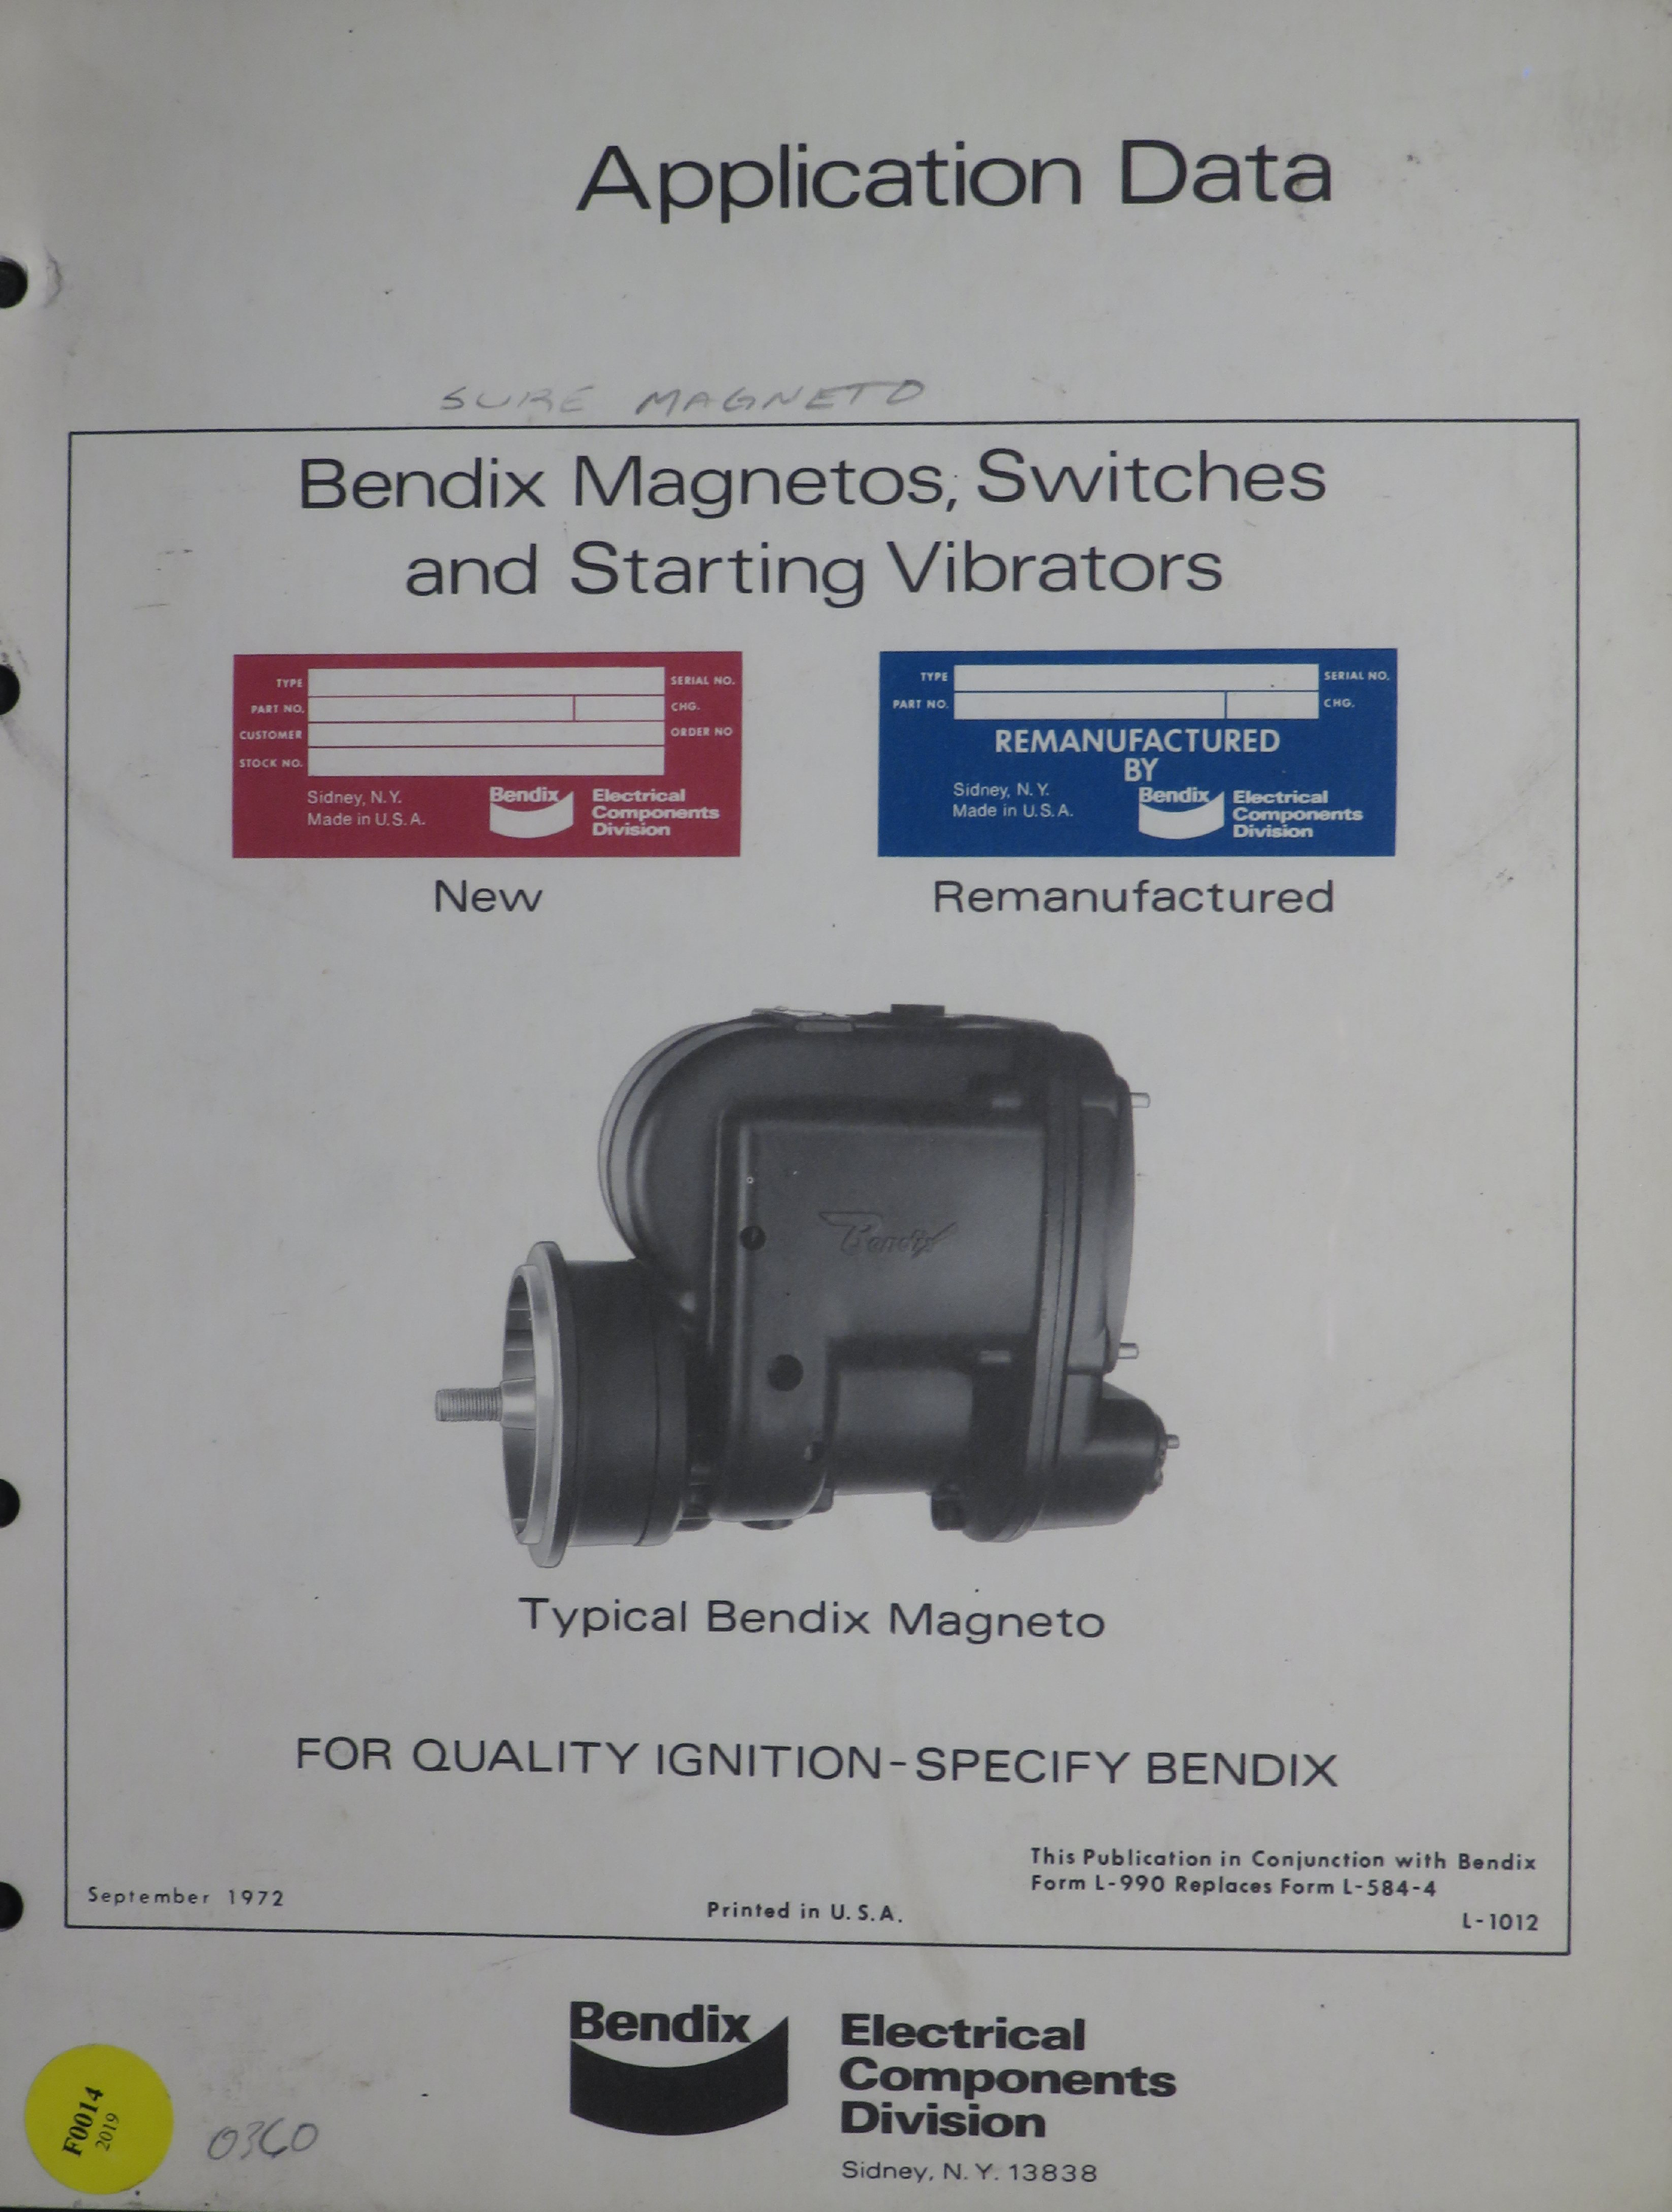 Sample page 1 from AirCorps Library document: Application Data for Bendix Magnetos, Switches and Starting Vibrators